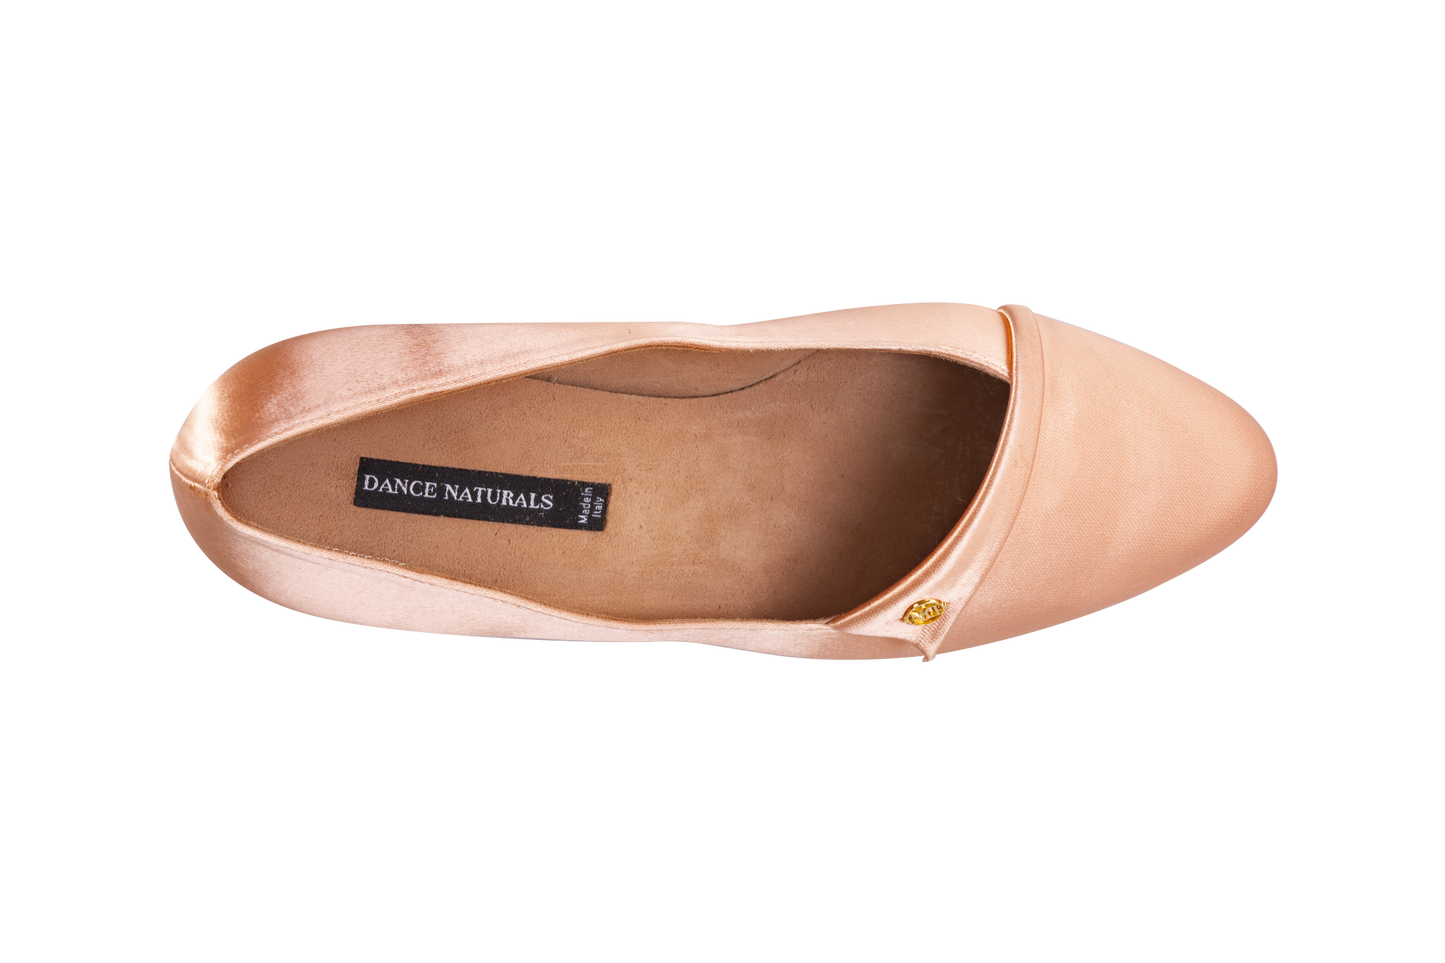 Dance Naturals 400 Lucietta Flesh Satin Rounded Toe Ballroom Shoe Embellished by a Fine Lapel